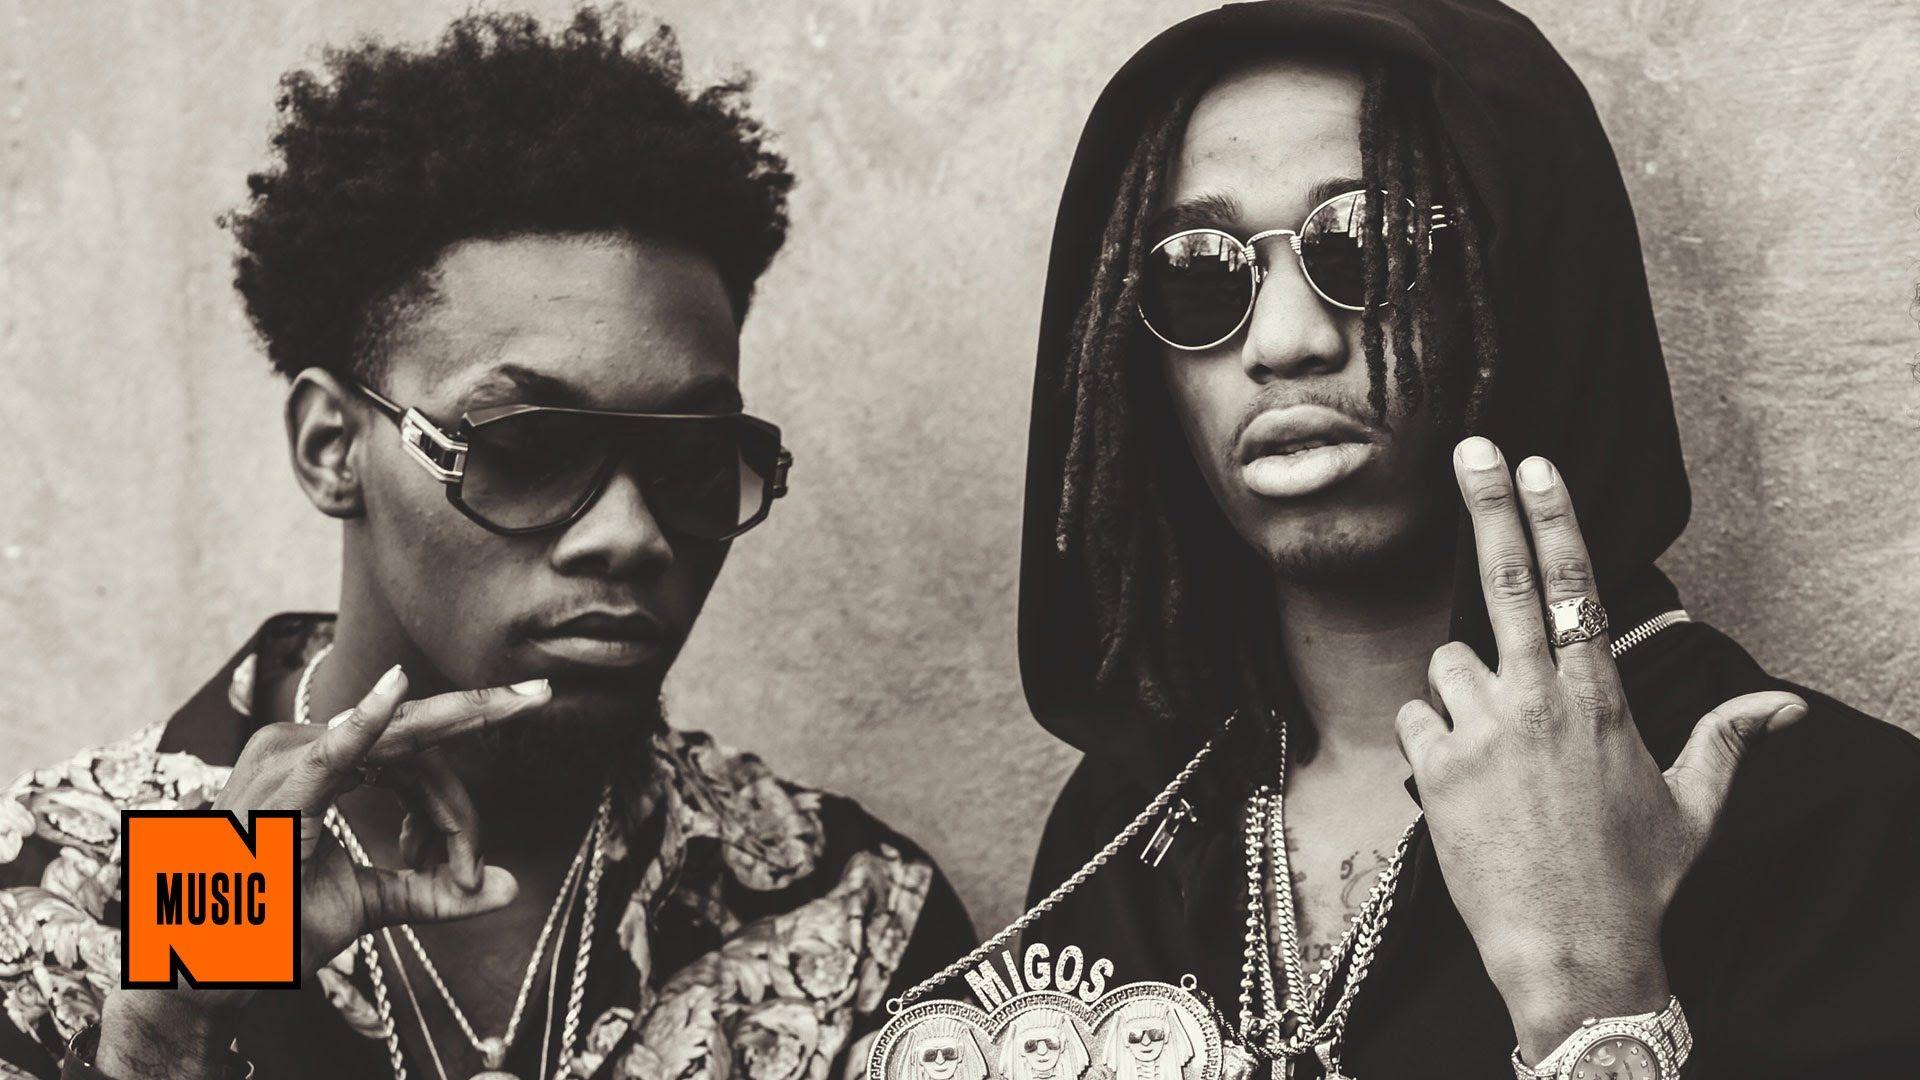 Quavo and Offset of Migos Arrested On Felony Gun and Drug Charges